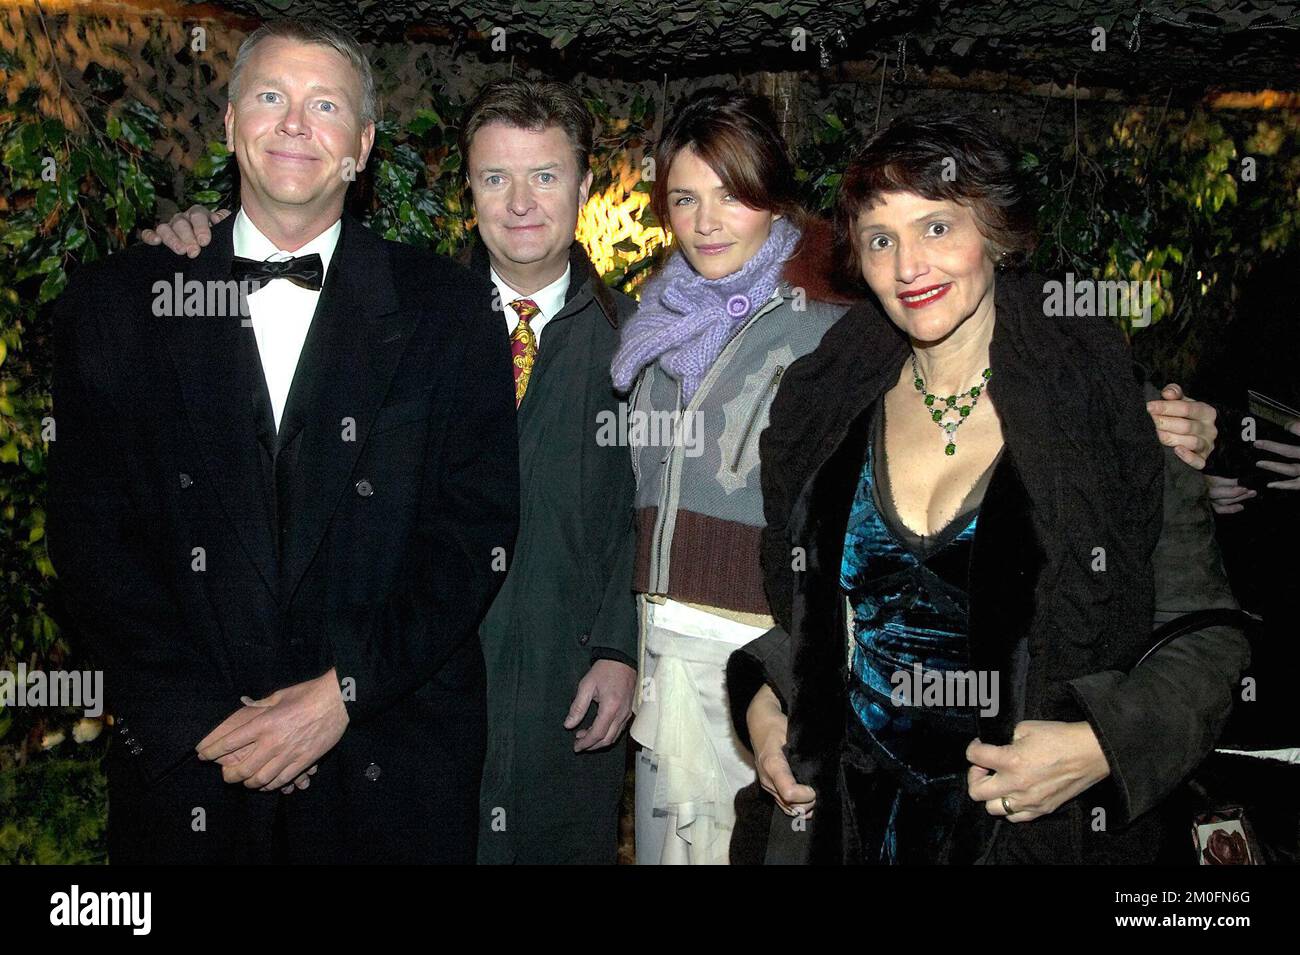 PA PHOTOS / POLFOTO - UK USE ONLY : Danish premiere on 'The Lord of the Rings' in Copenhagen Sunday night. Both royals and celebrities attended the glittering premiere of 'The Lord of The Rings: The Two Towers'. Picture shows super model Helena Christensen with her parents Elsa and Flemming. Far left, Danish millionaire, and businessman Peter Achenfeldt. Stock Photo